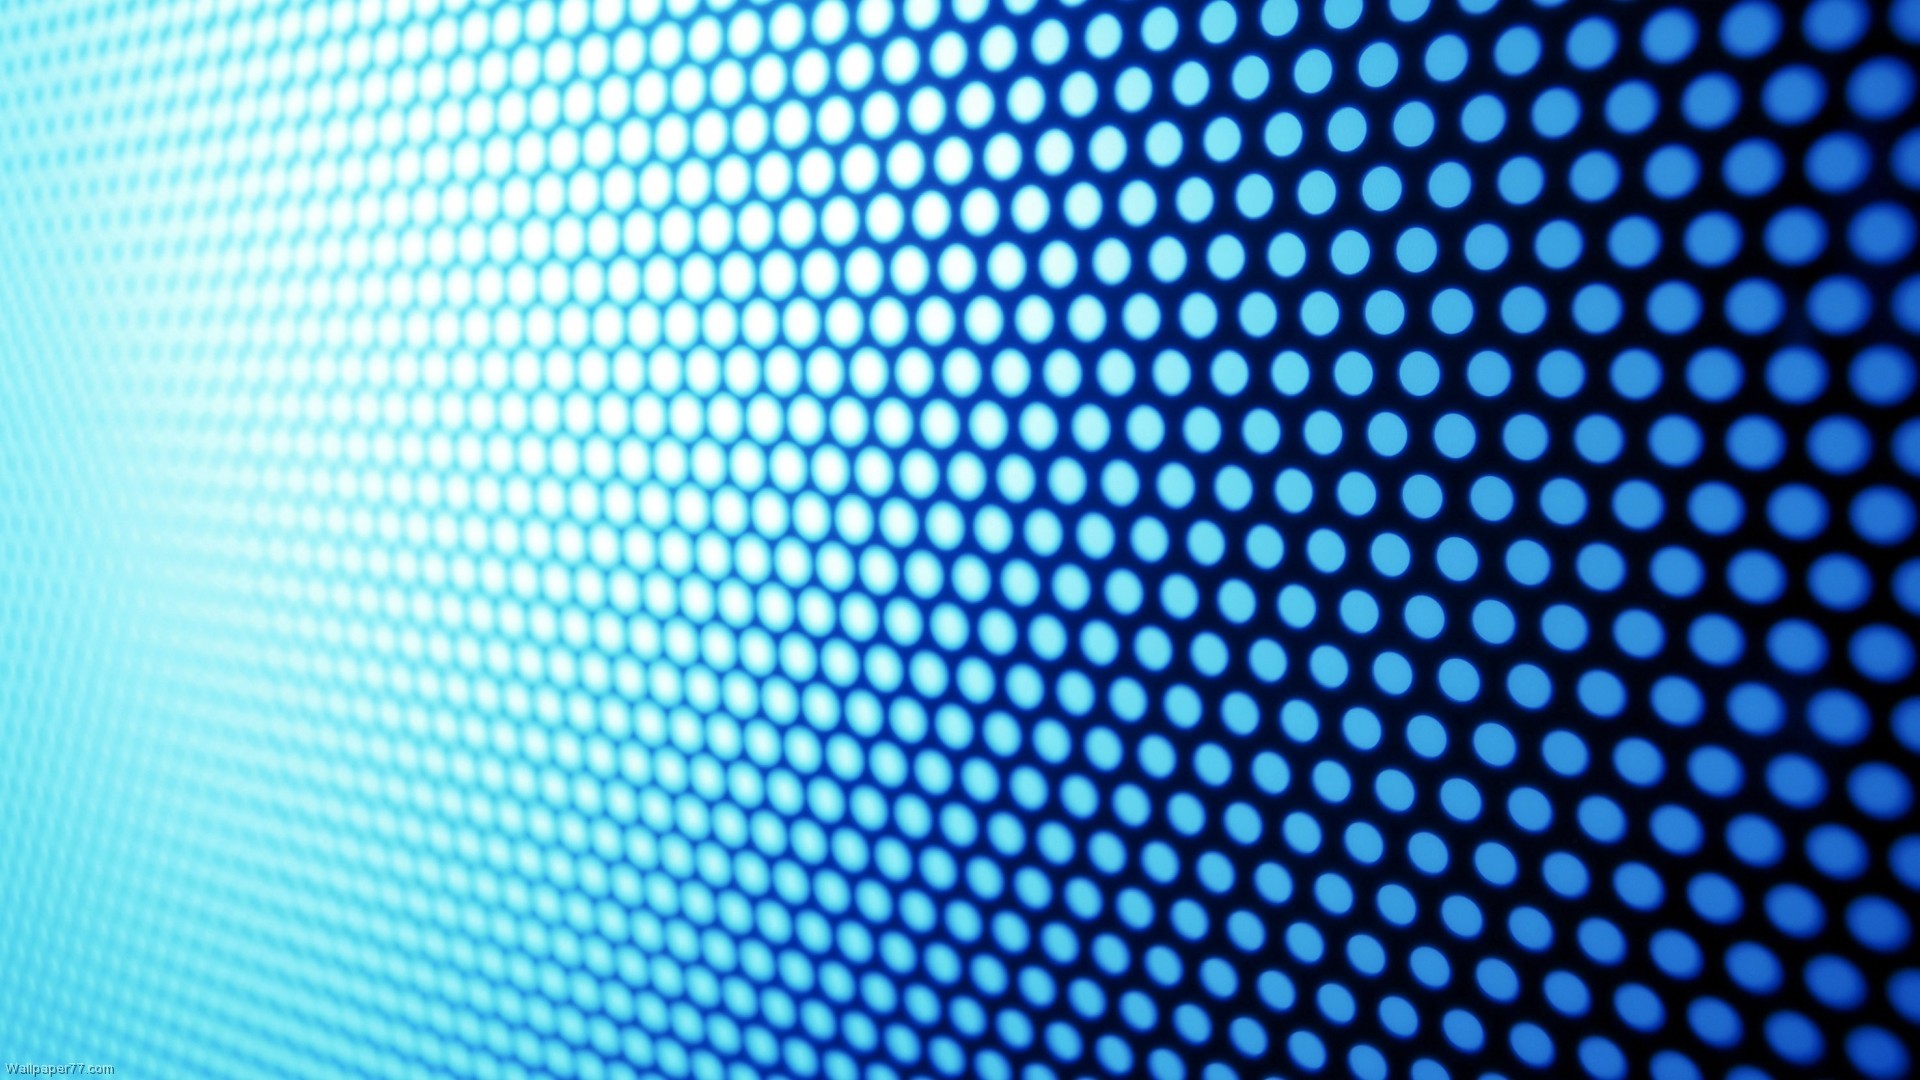 1920x1080 Blue Dots Pattern - See more Beautiful background images for video at  backgroundimages.